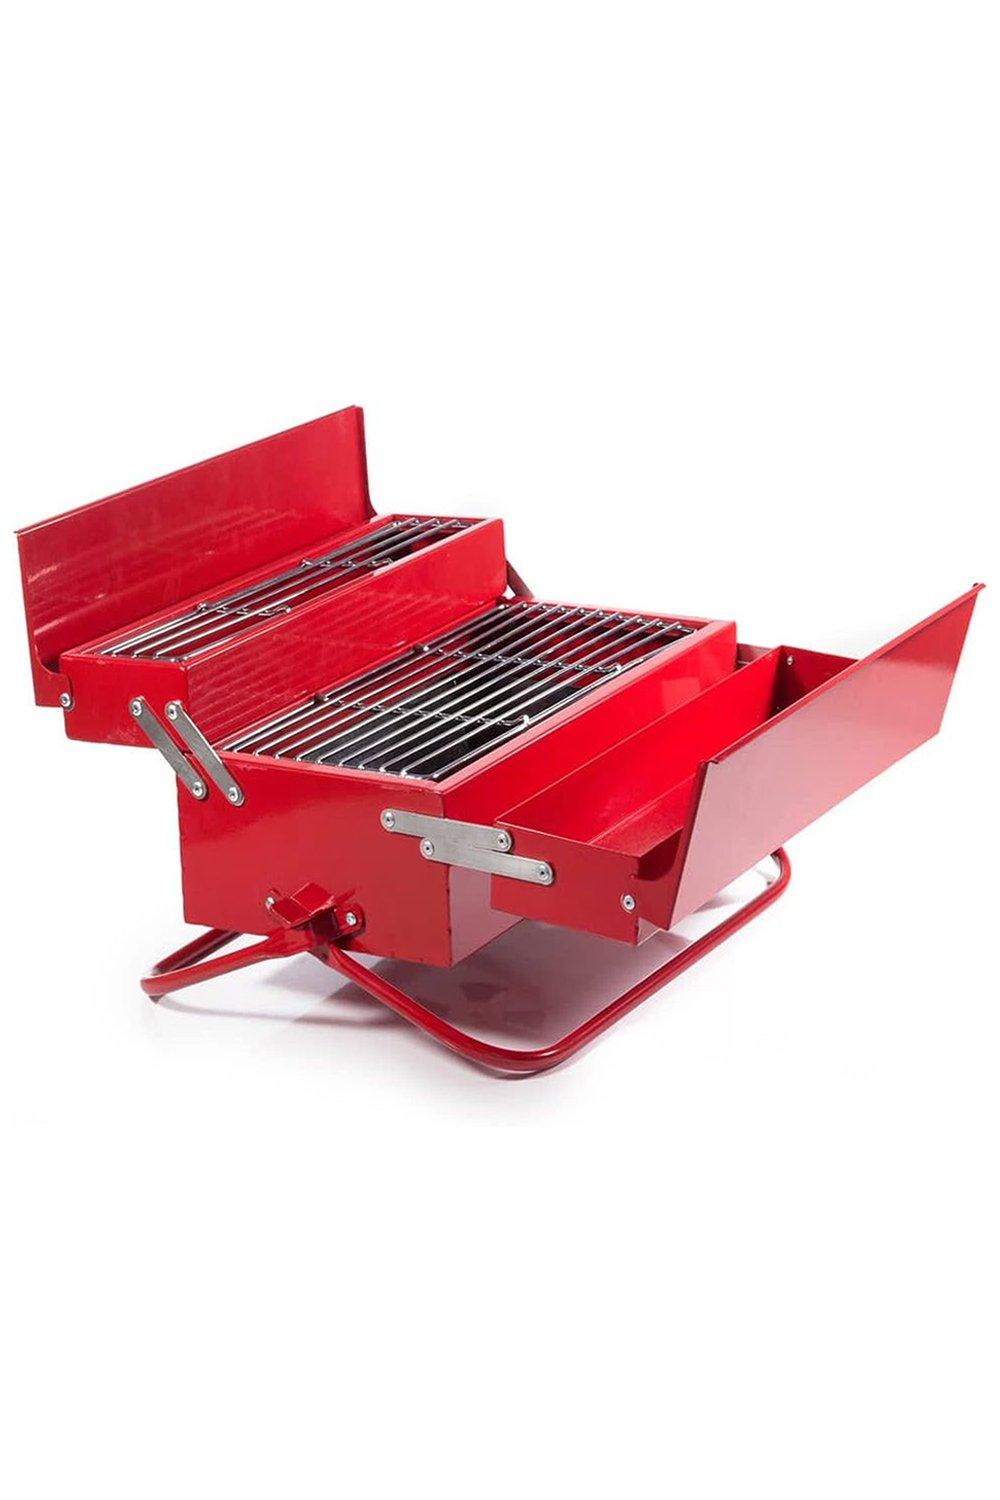 Stainless Steel BBQ Grill Tool Box Red